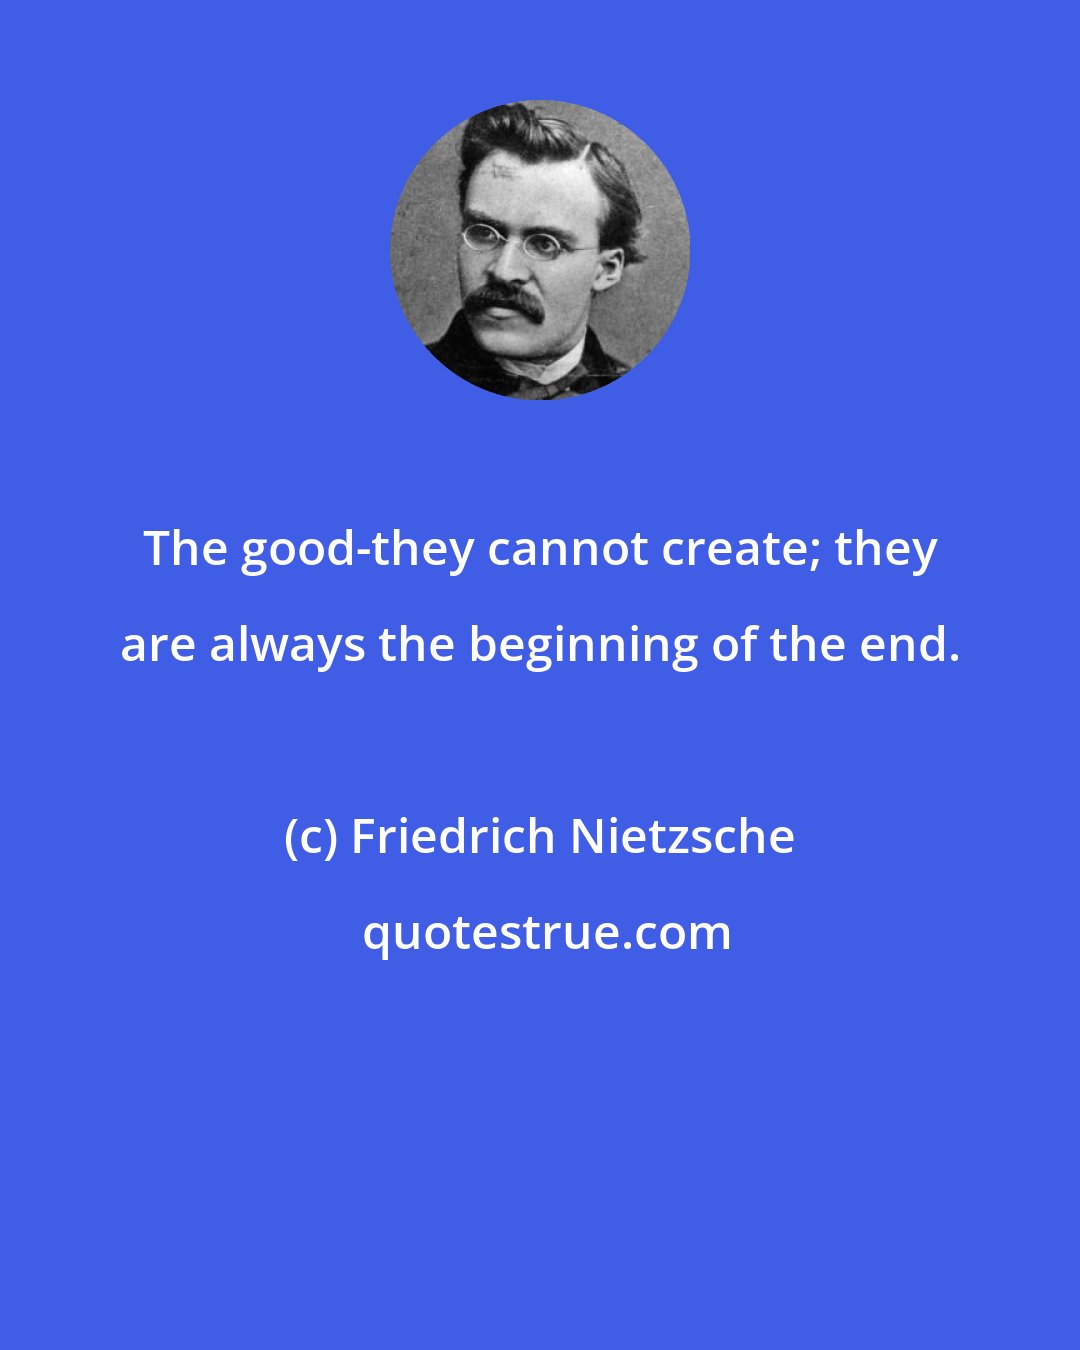 Friedrich Nietzsche: The good-they cannot create; they are always the beginning of the end.